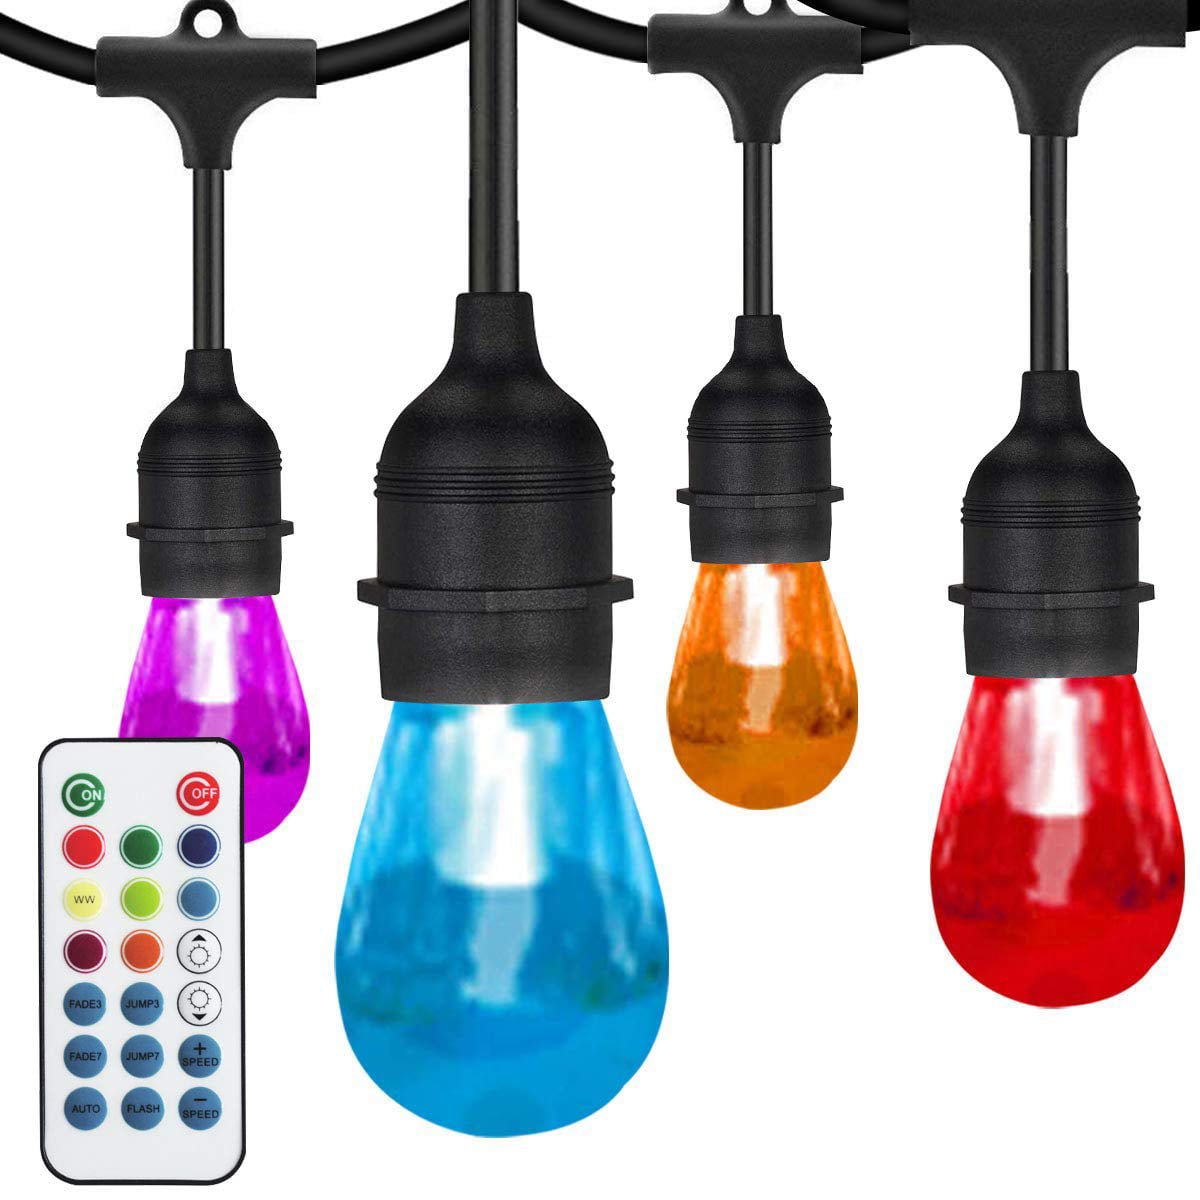 Outdoor String Lights Patio Lights|Outdoor Waterproof|Porch Light with Remote MFOX 49FT Color Changing Outdoor String Lights Bistro Music Sync for Patio Decor Balcony 